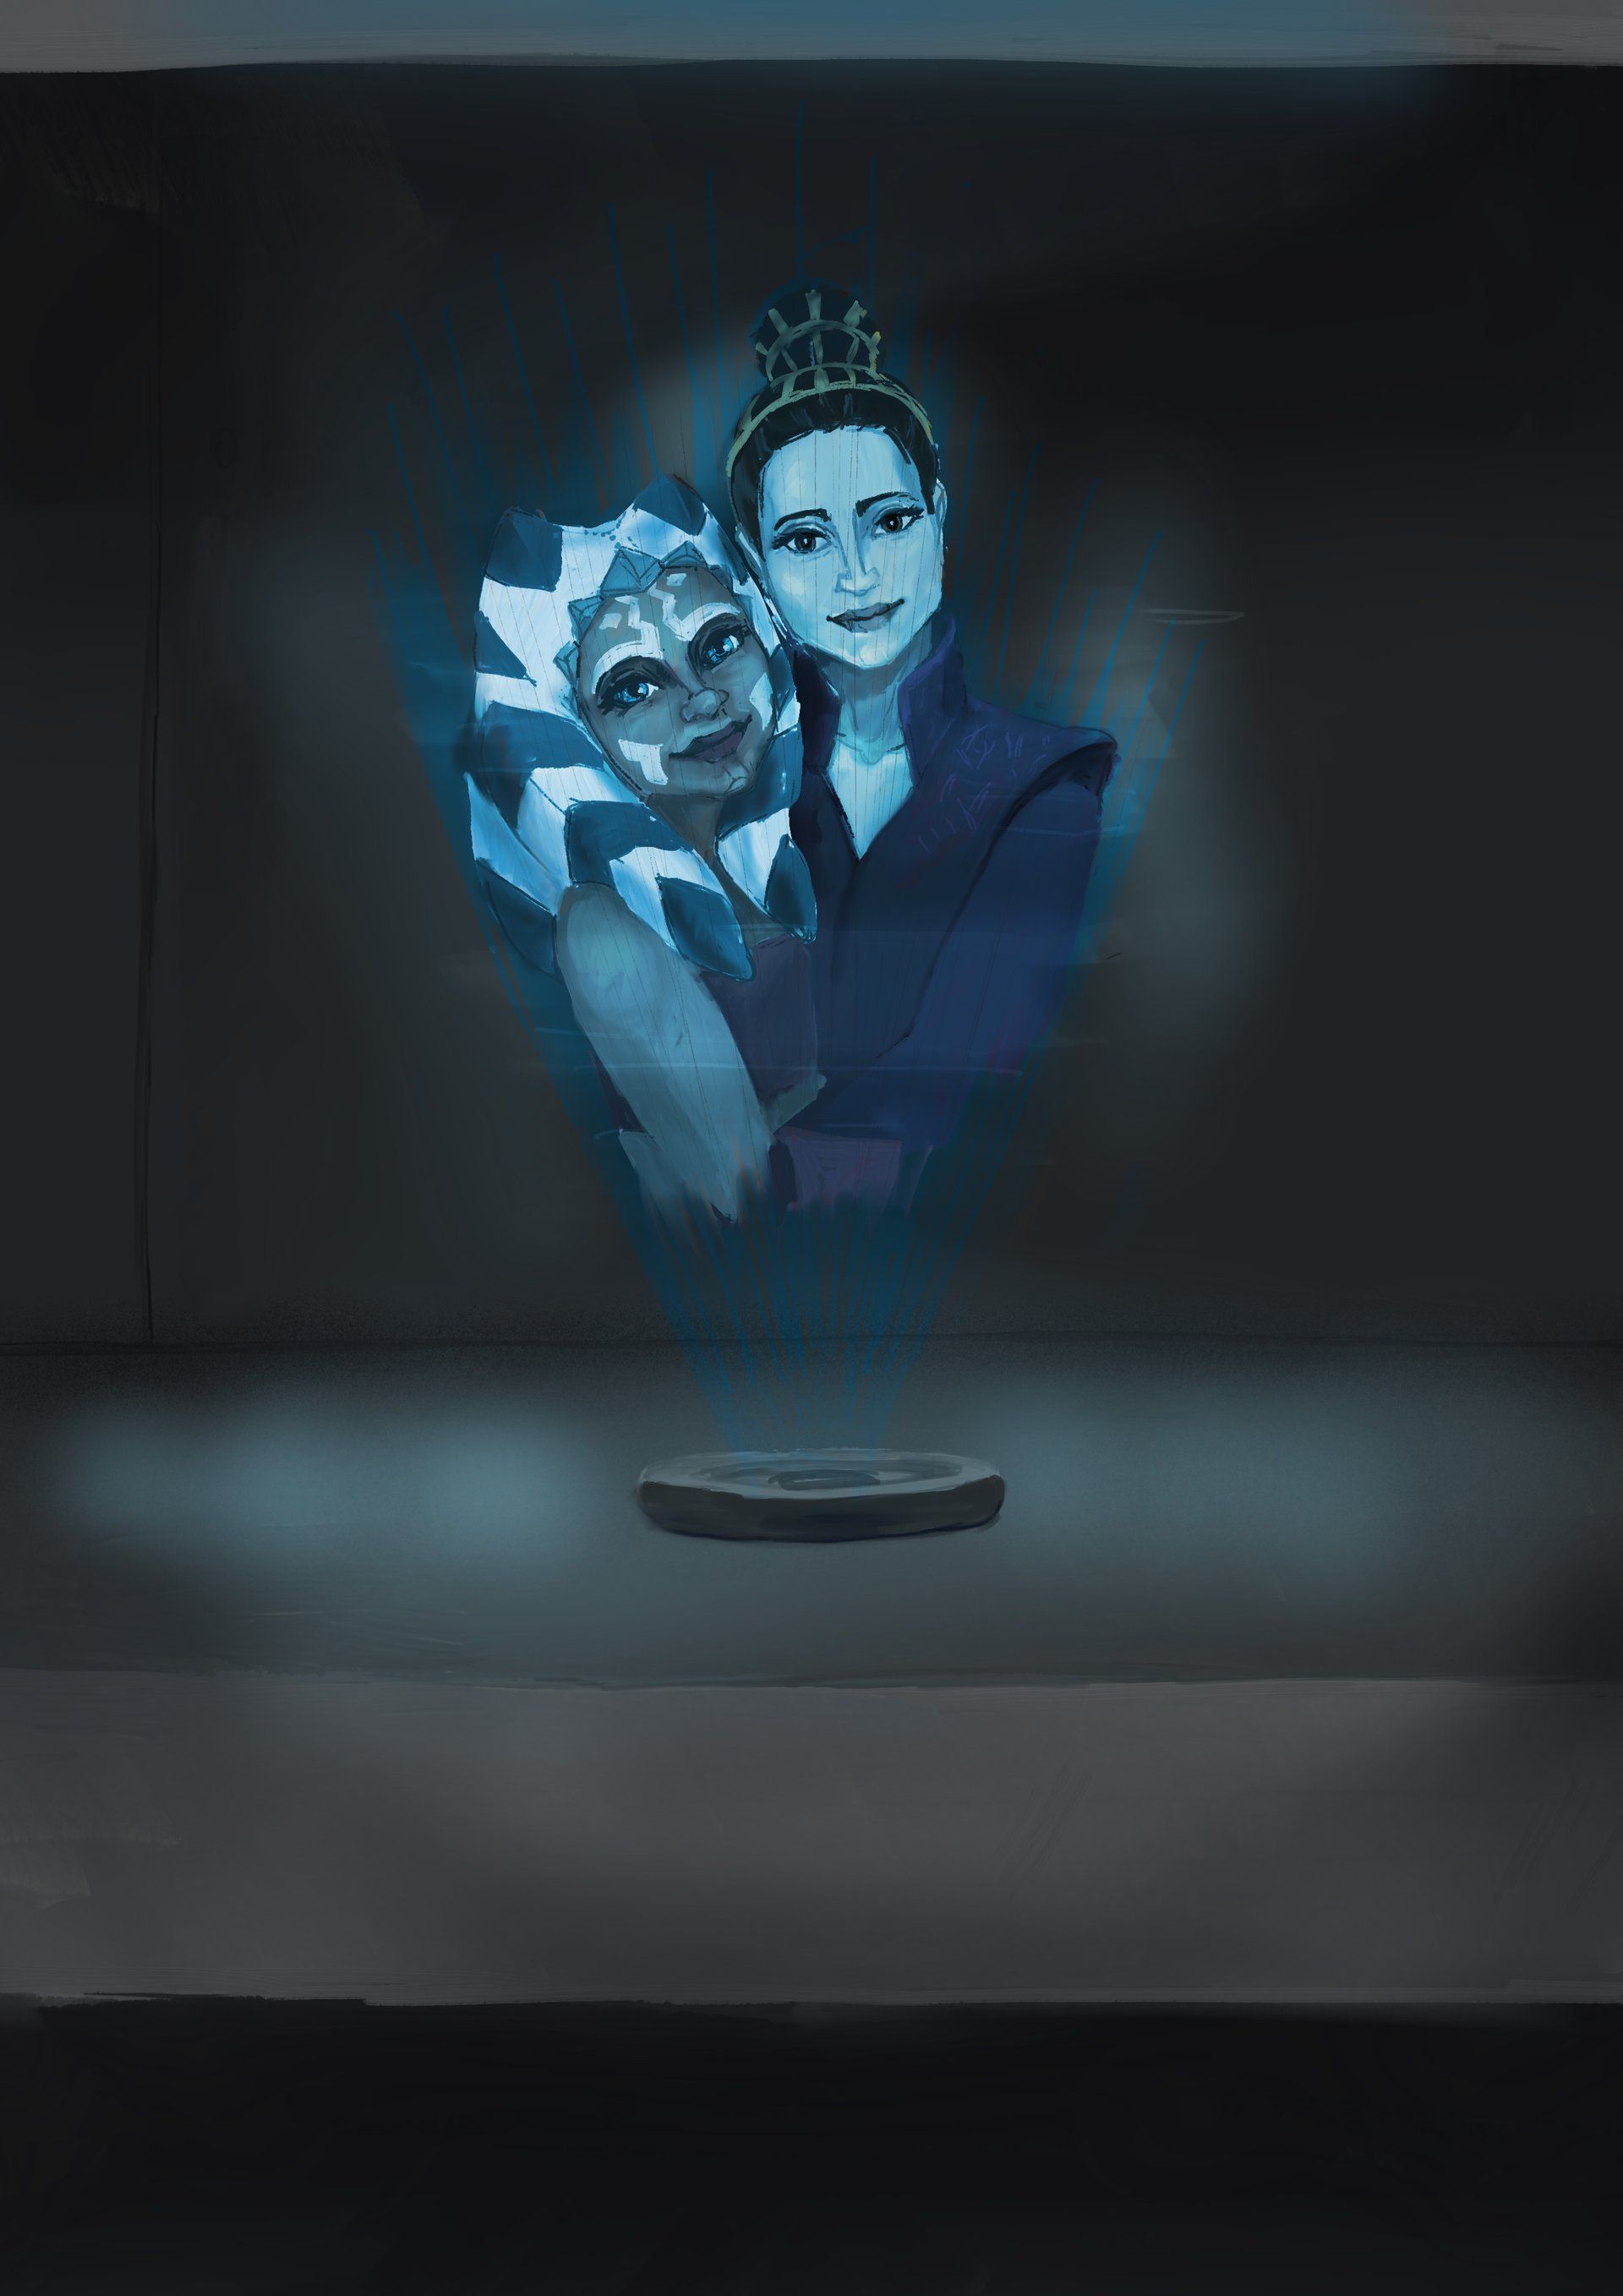 Digital painting of a Star Wars holoprojector lying on a metal shelf. The projector displays a portrait of Ahsoka Tano and Padmé Amidala. They're hugging and smiling at the viewer.